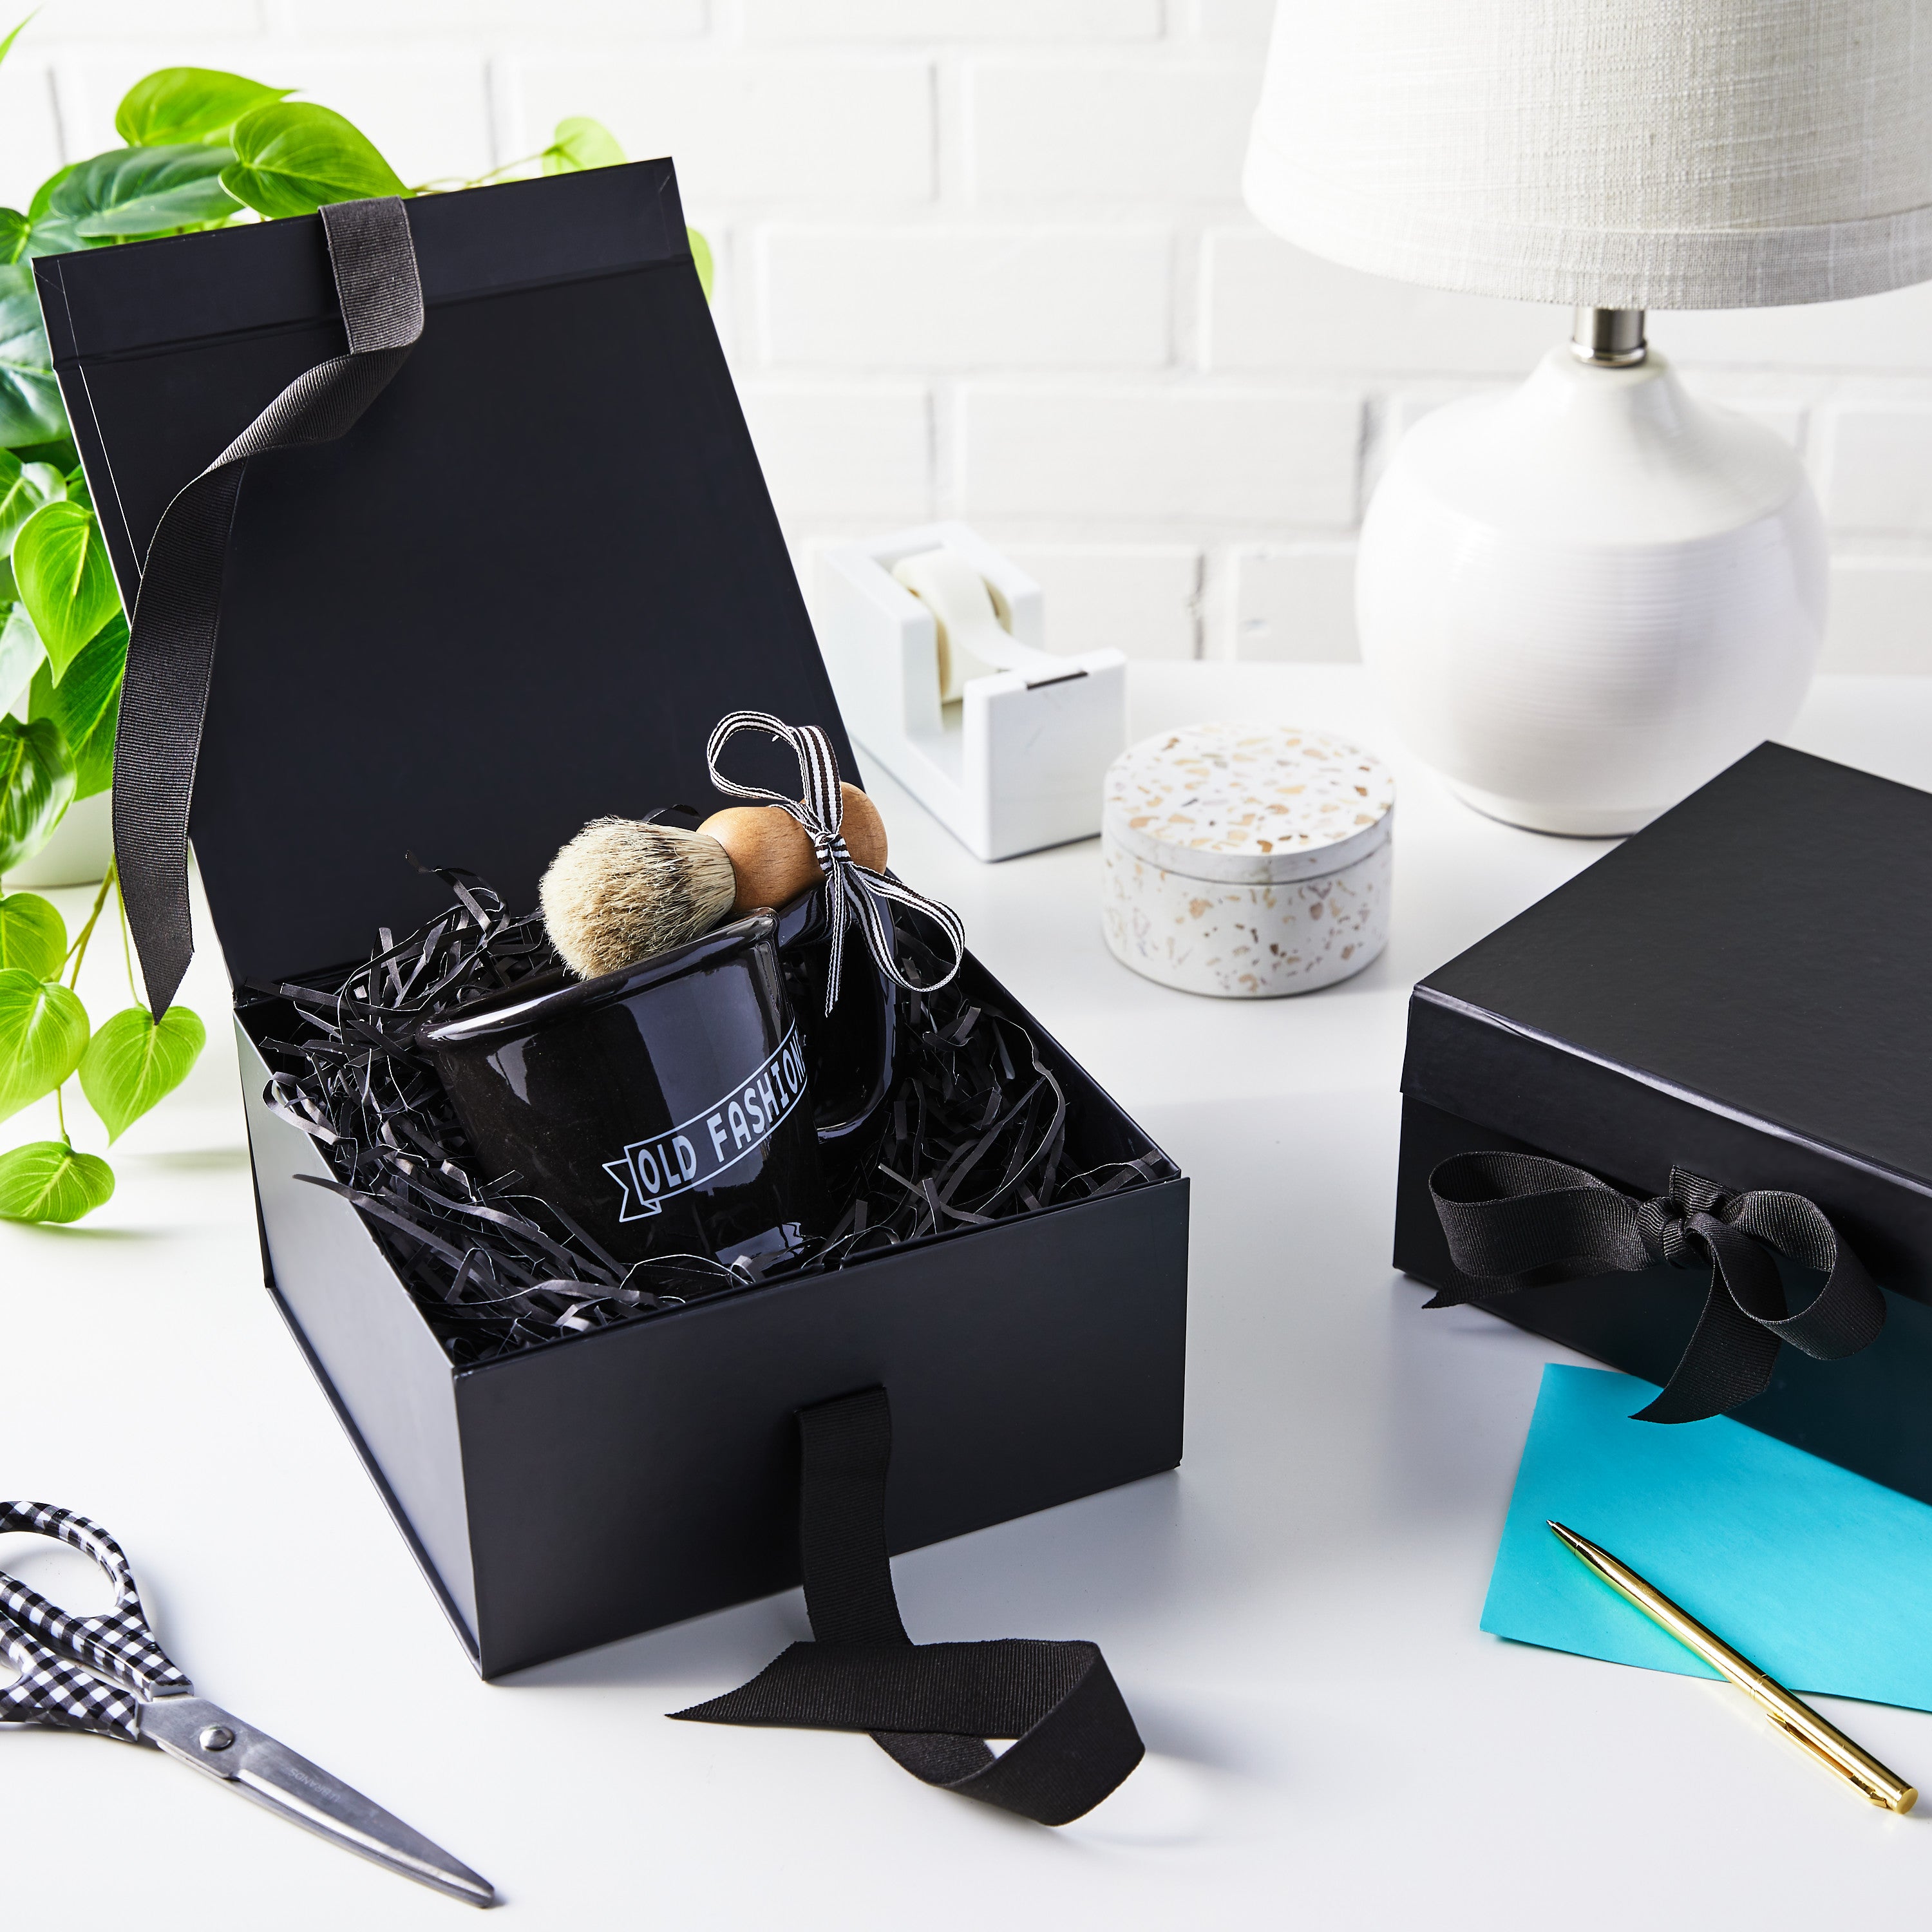 Hallmark Foldable Gift Box Bundle (2 Matching Boxes with Ribbon: Solid Black) for Weddings, Groomsmen Gifts, Engagements, Graduations